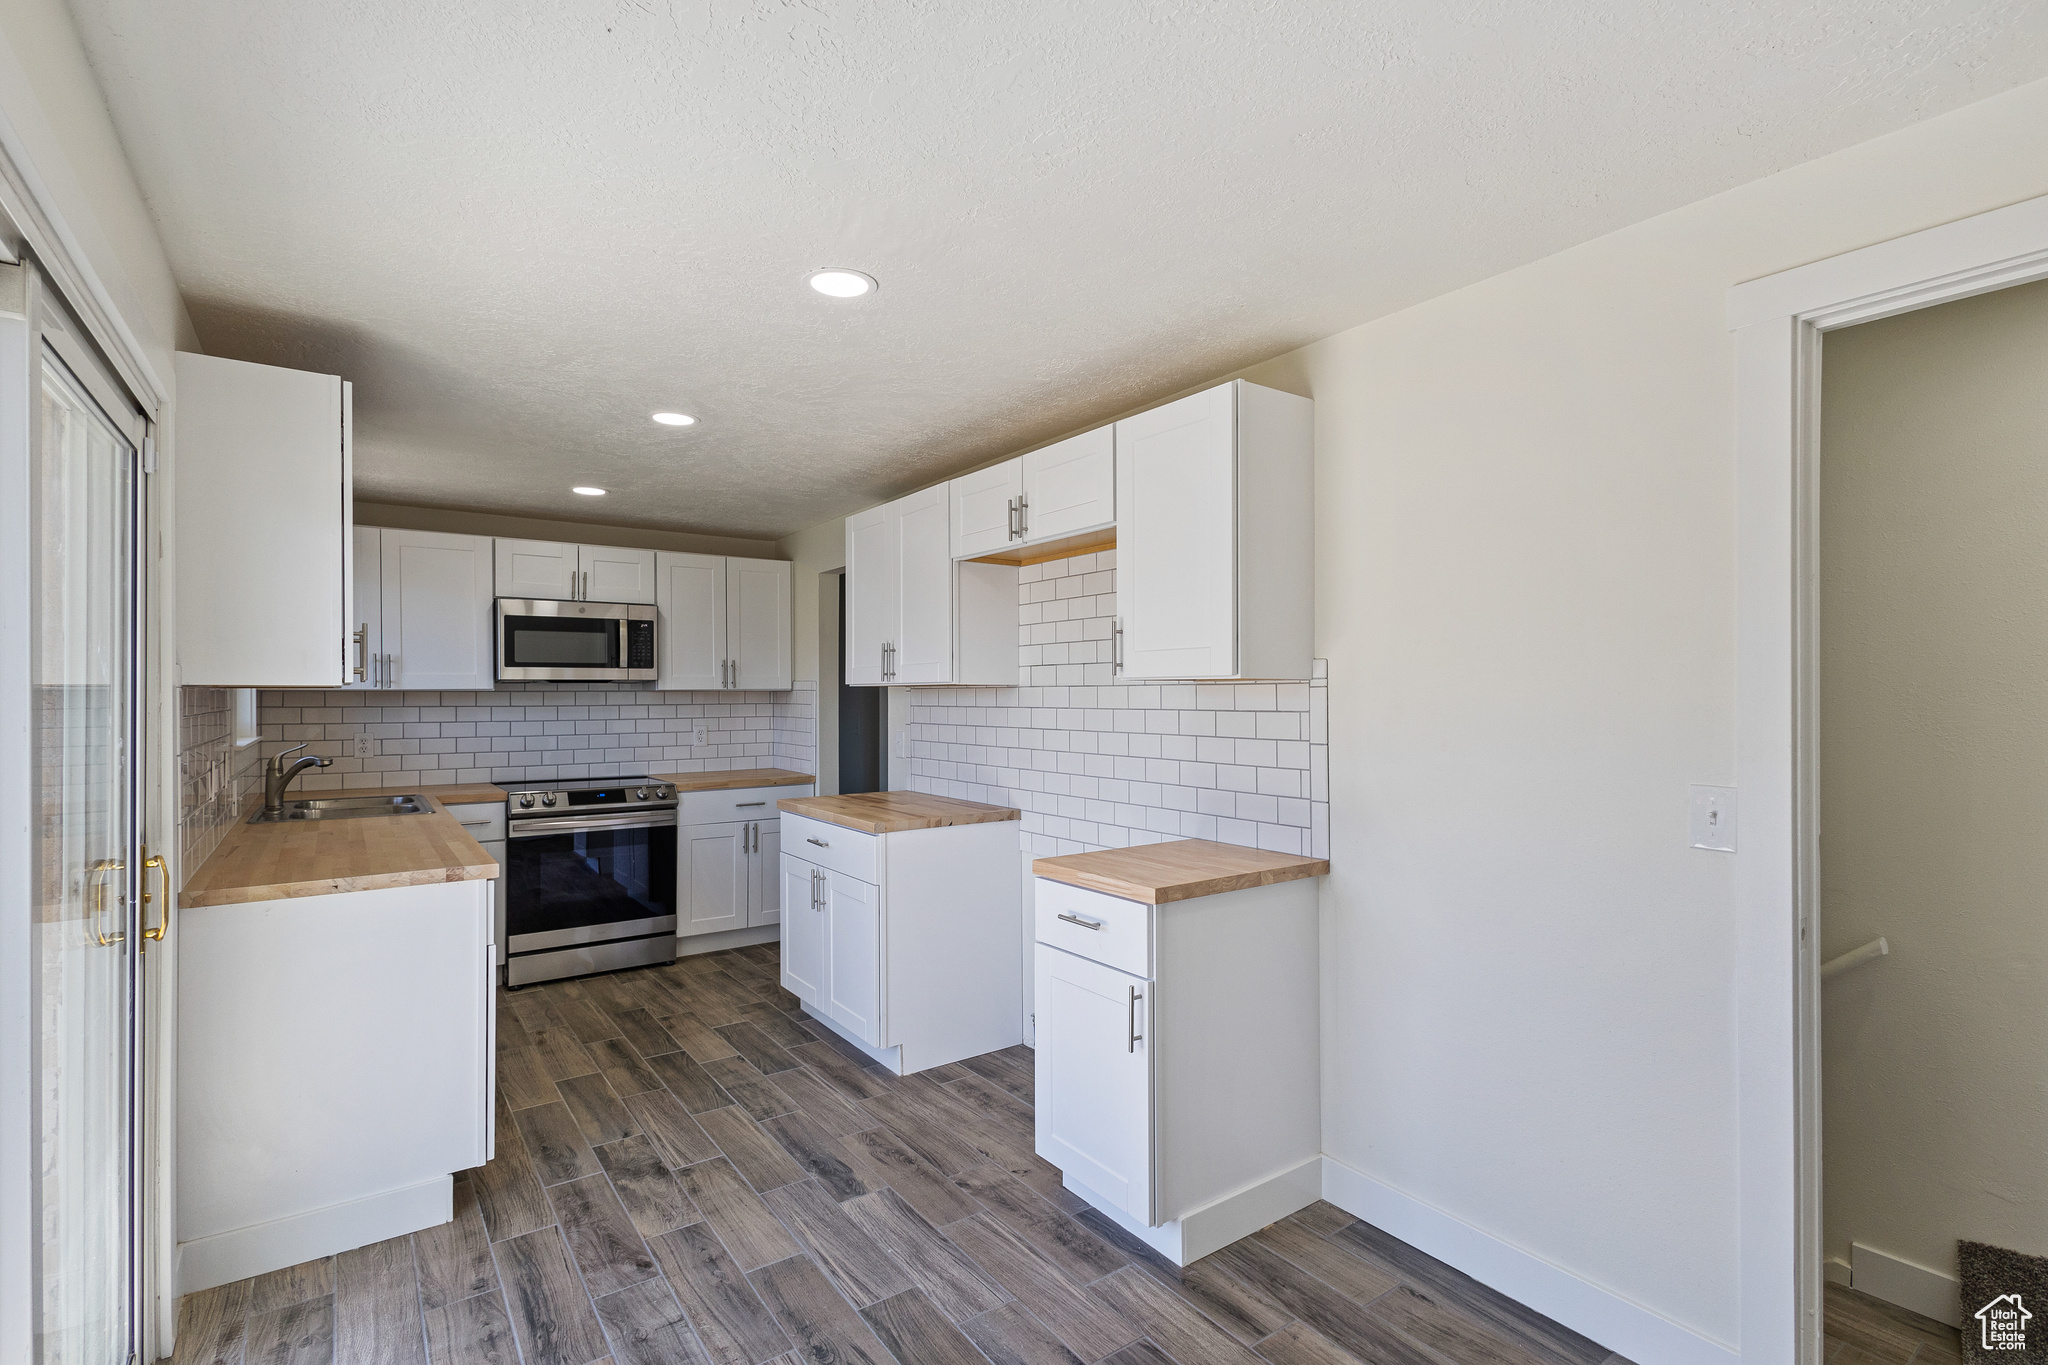 Updated Kitchen featuring tiled backsplash, Stainless appliances , Butcher Block countertops, and tile floors.